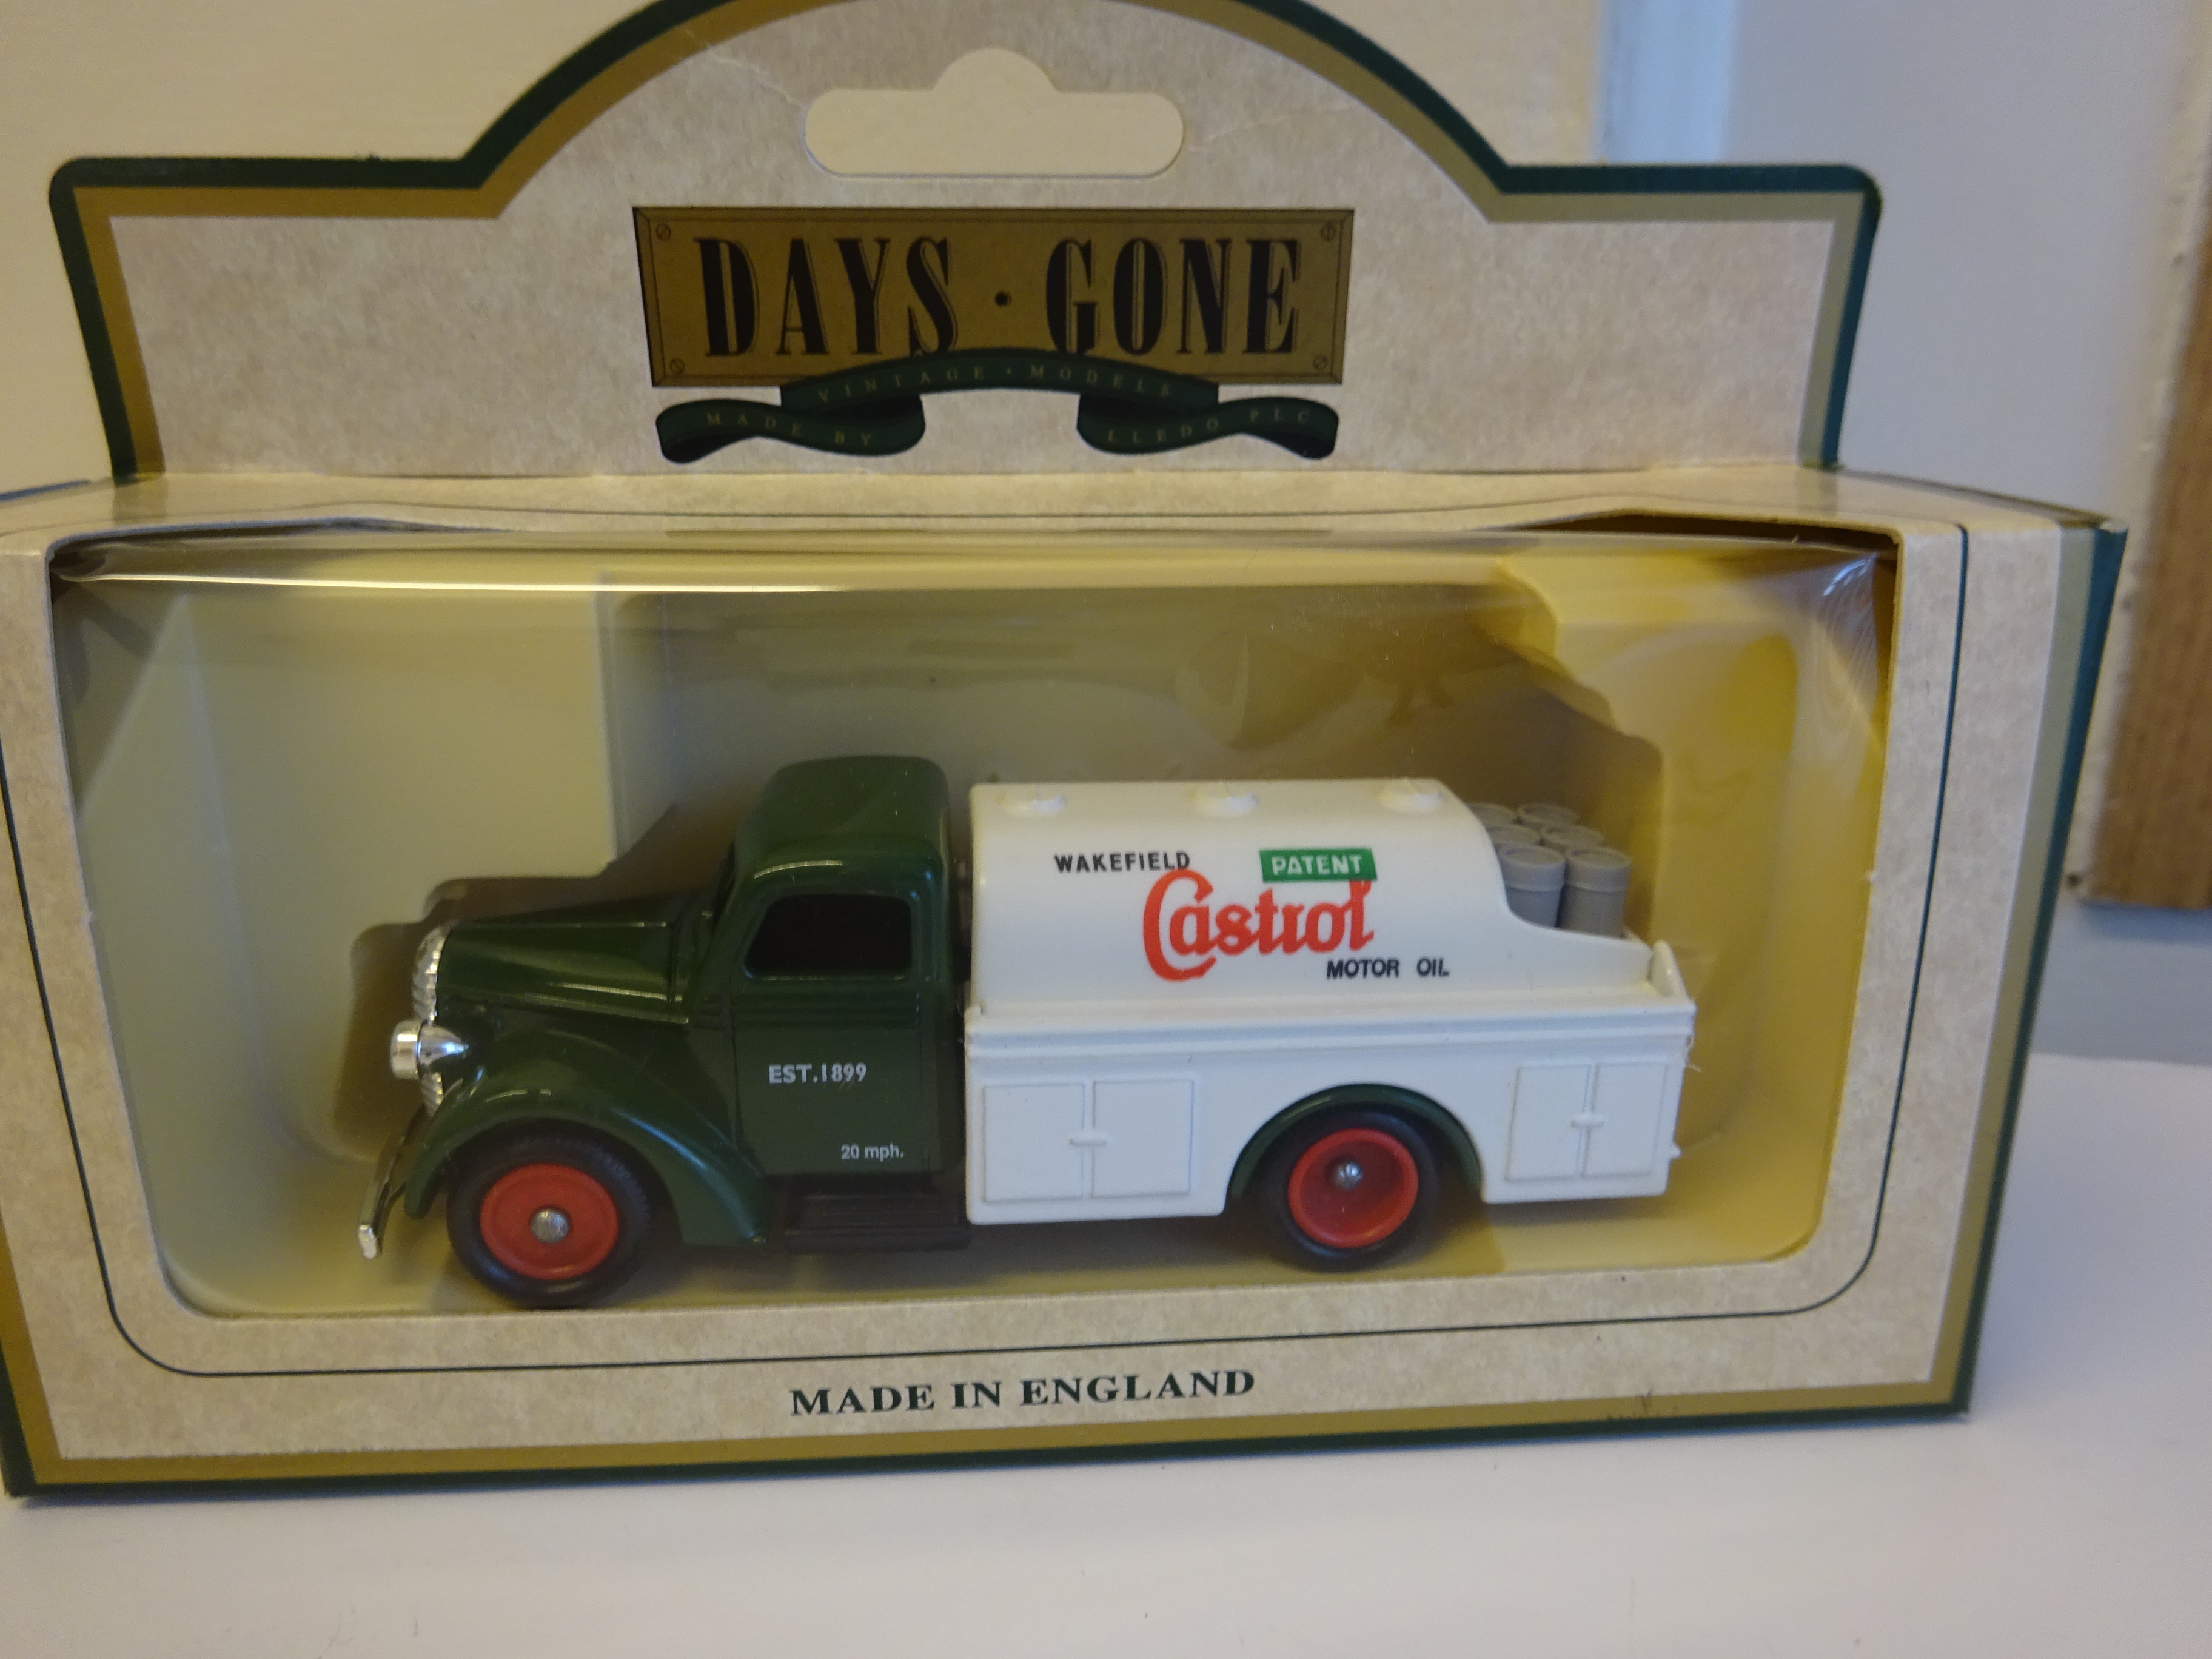 10 x Days Gone commercial vehicles - Image 4 of 10